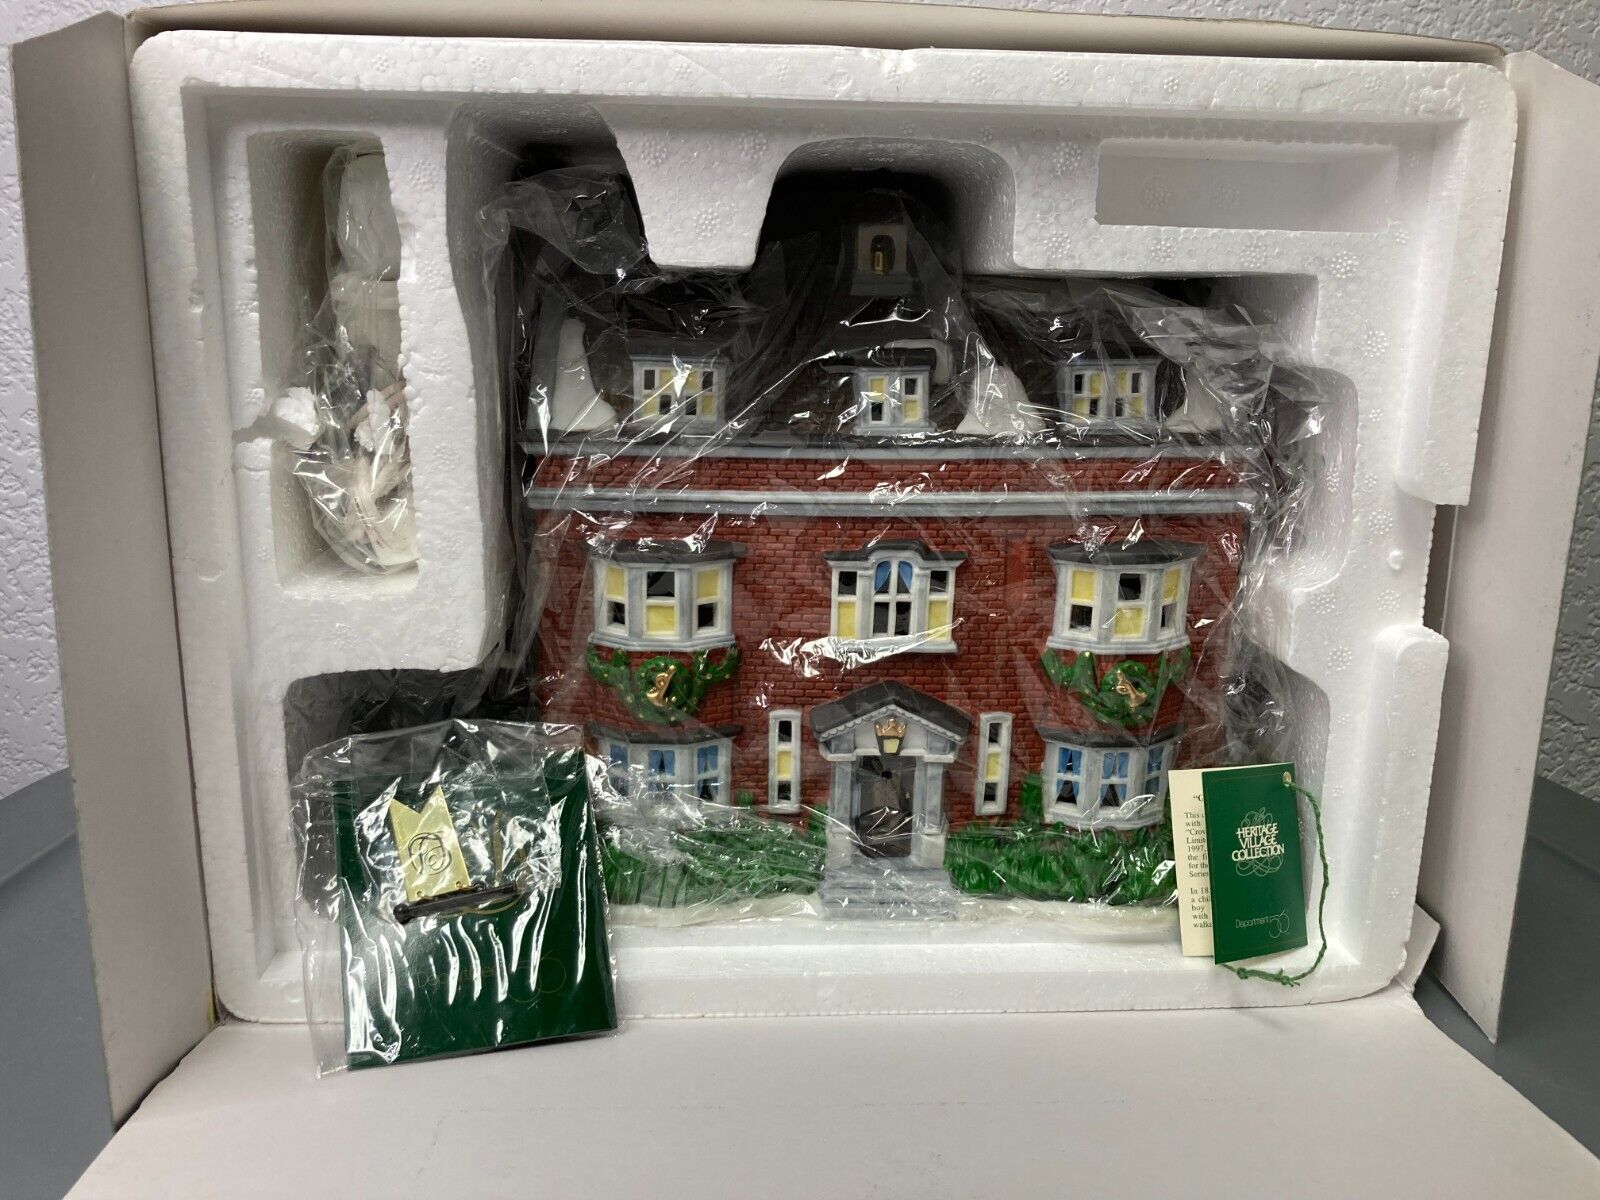 NEW Dept 56 Dickens Village Series Gad's Hill Place #57535 - Never Displayed